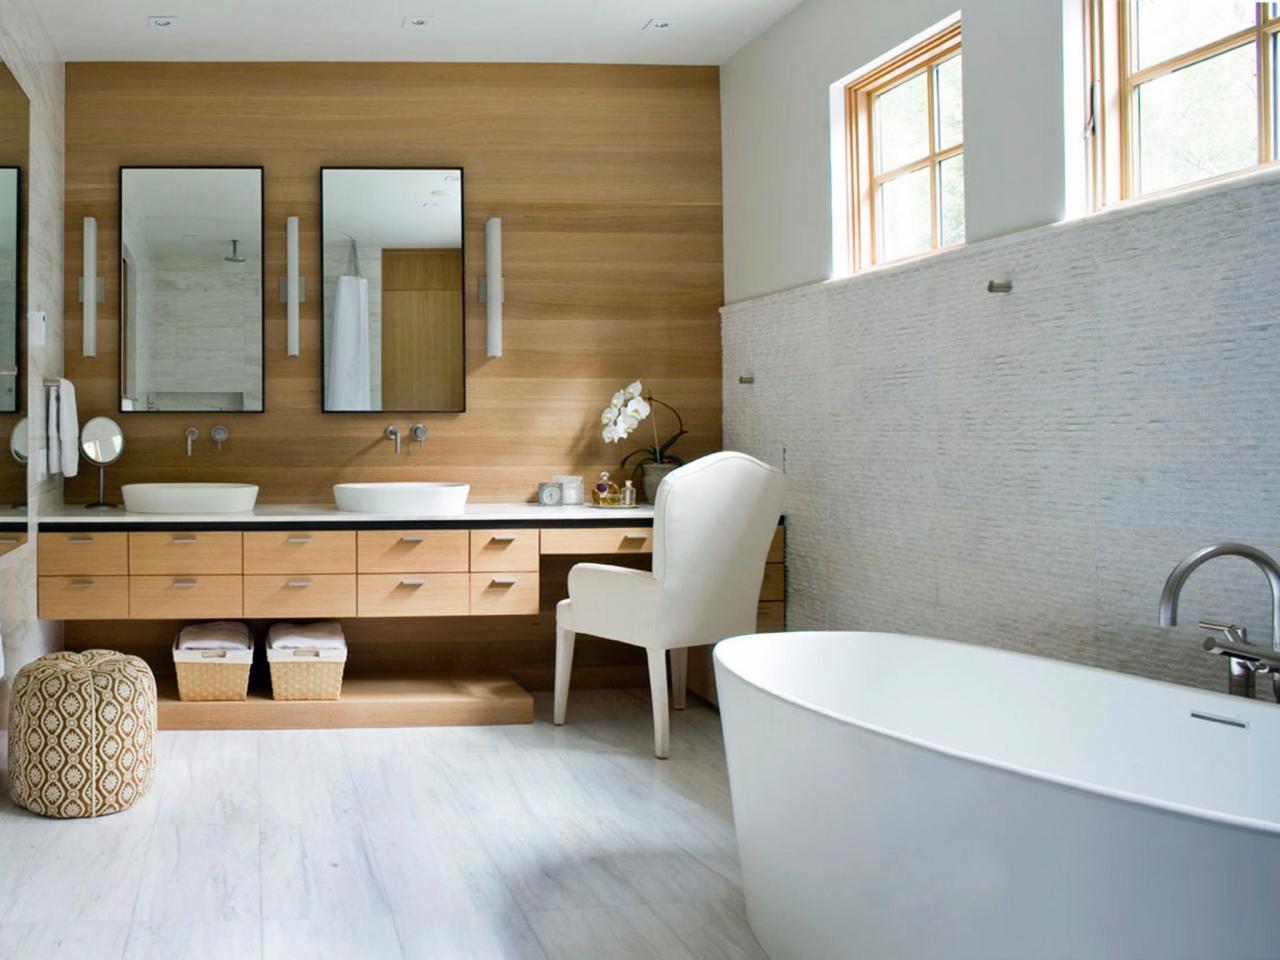 Luxurious Bathrooms and Spas  Get Inspired by Interior Design